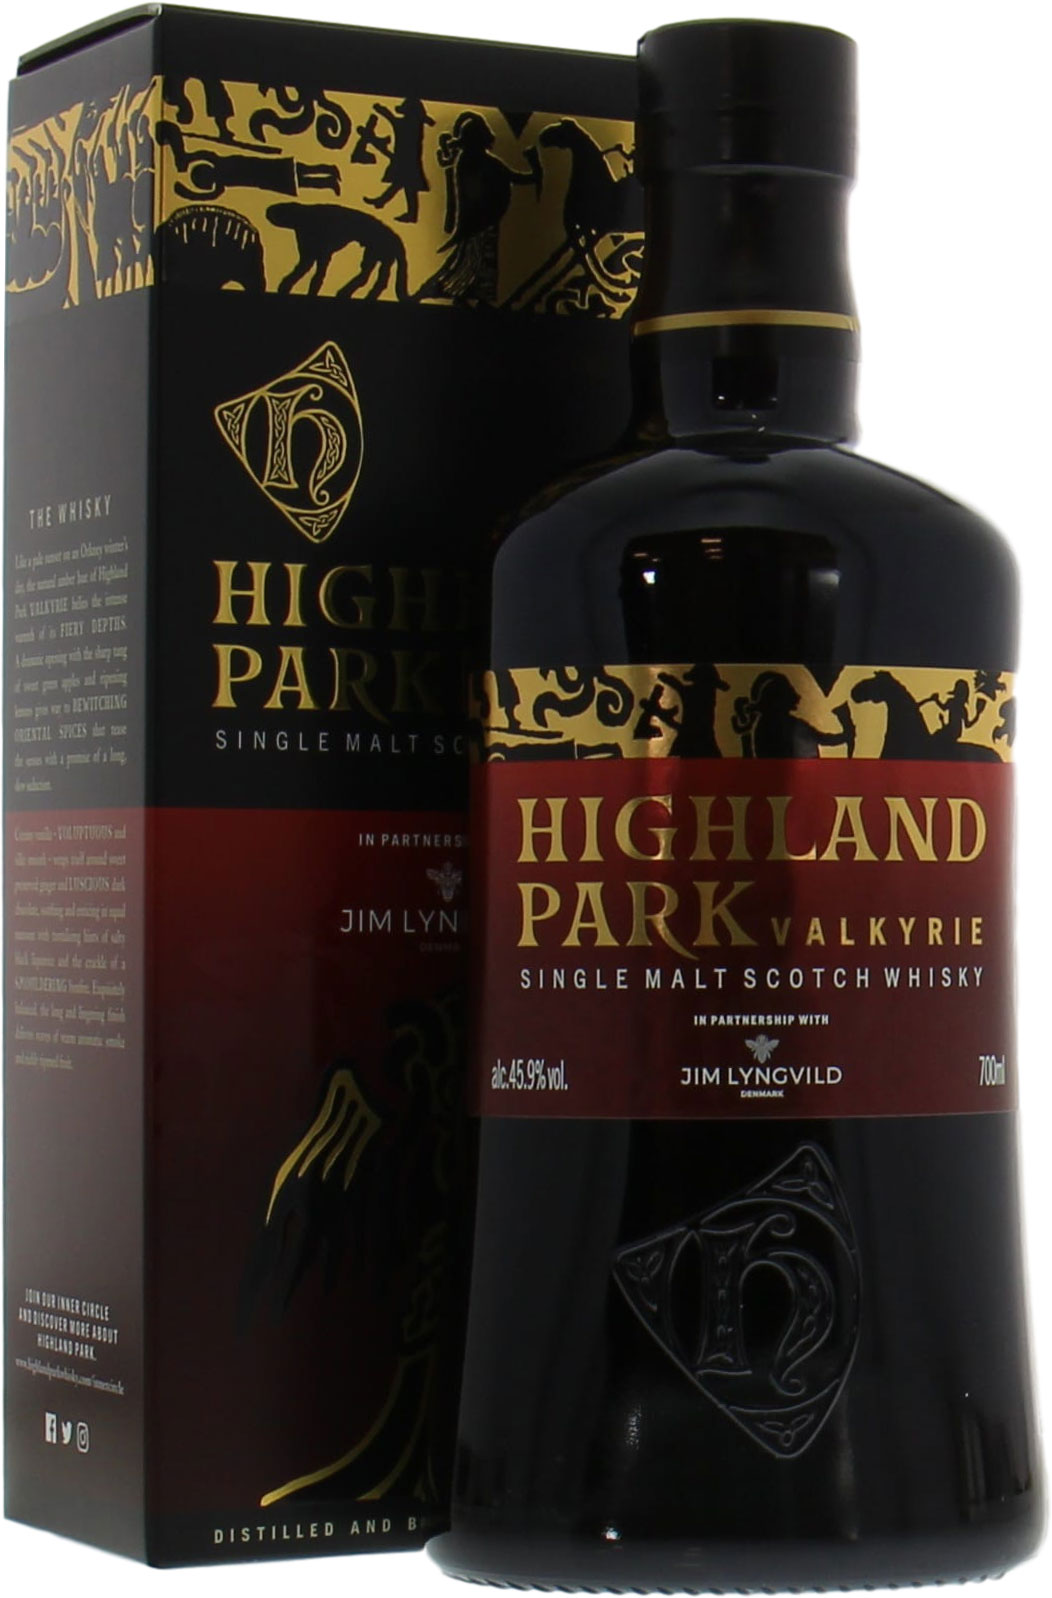 Highland Park - Valkyrie 45.9% NV In Original Container